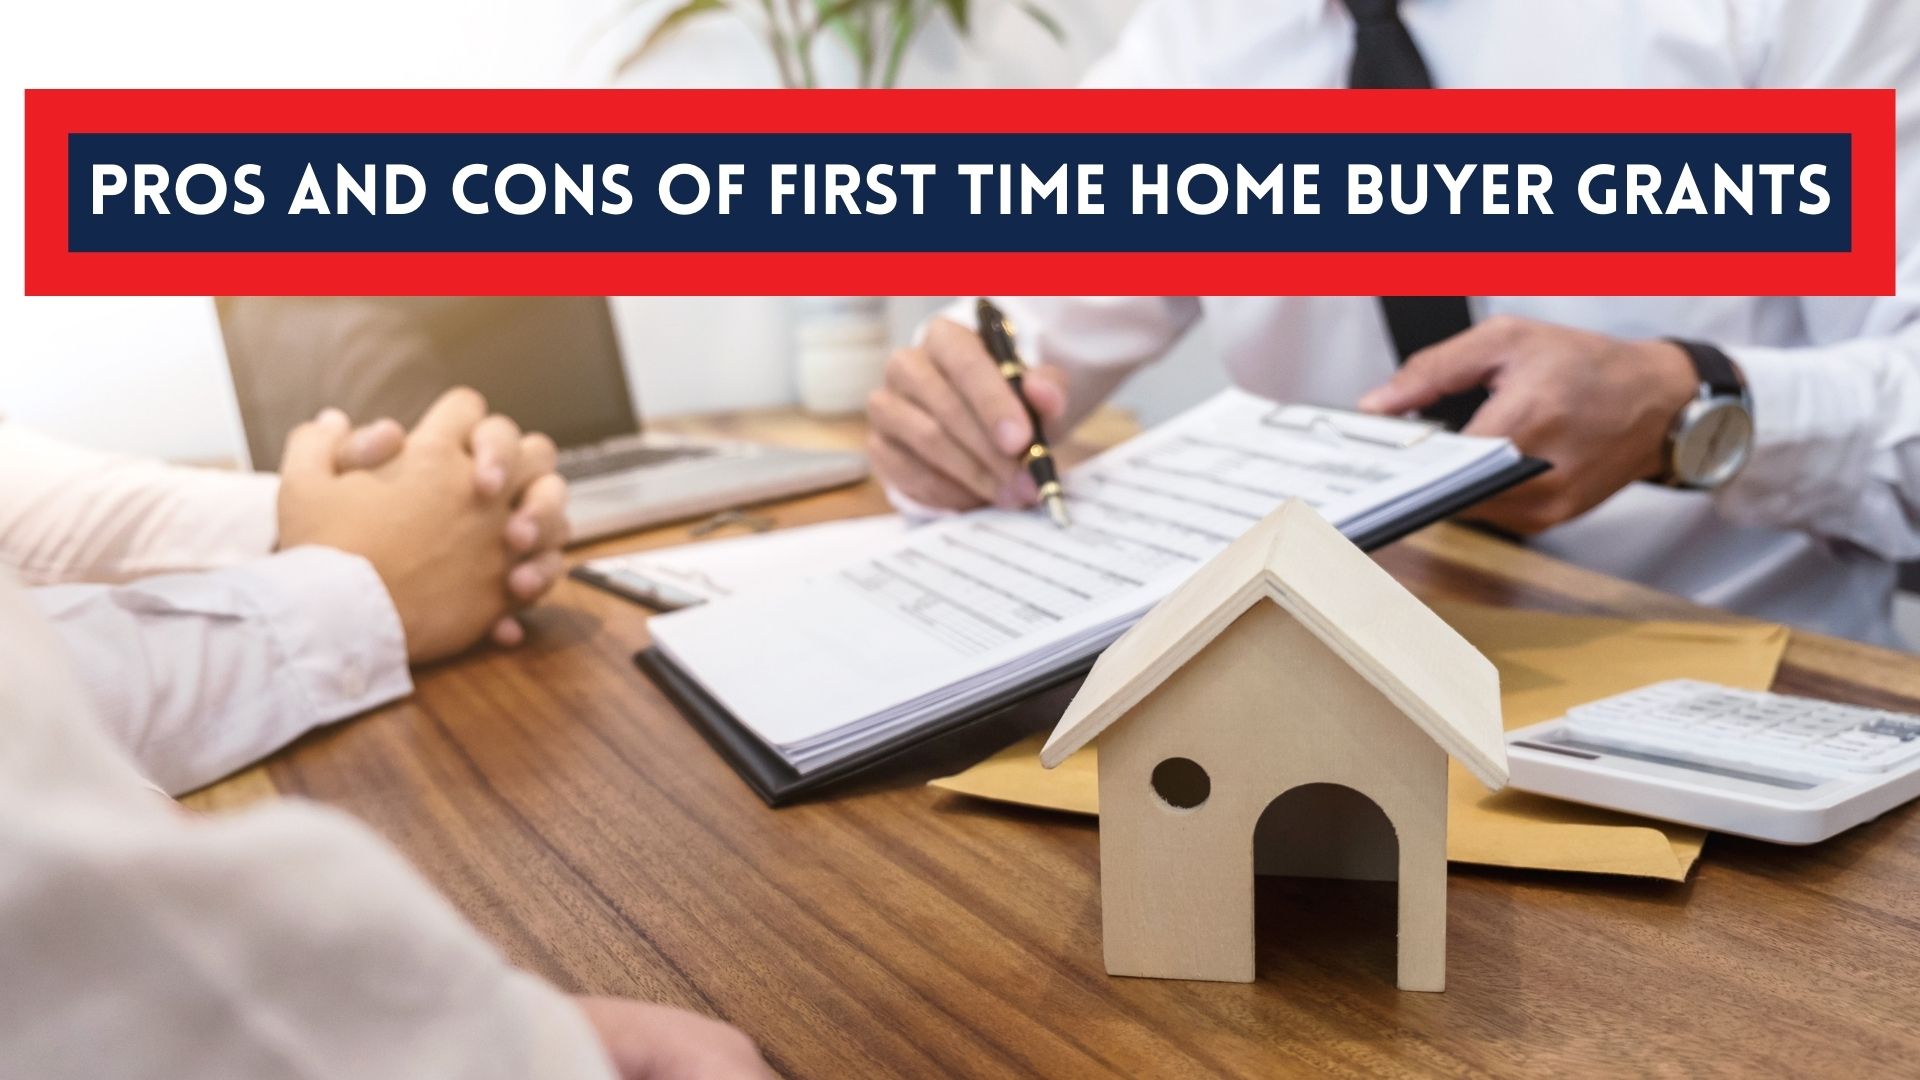 Pros and Cons of First Time Home Buyer Program